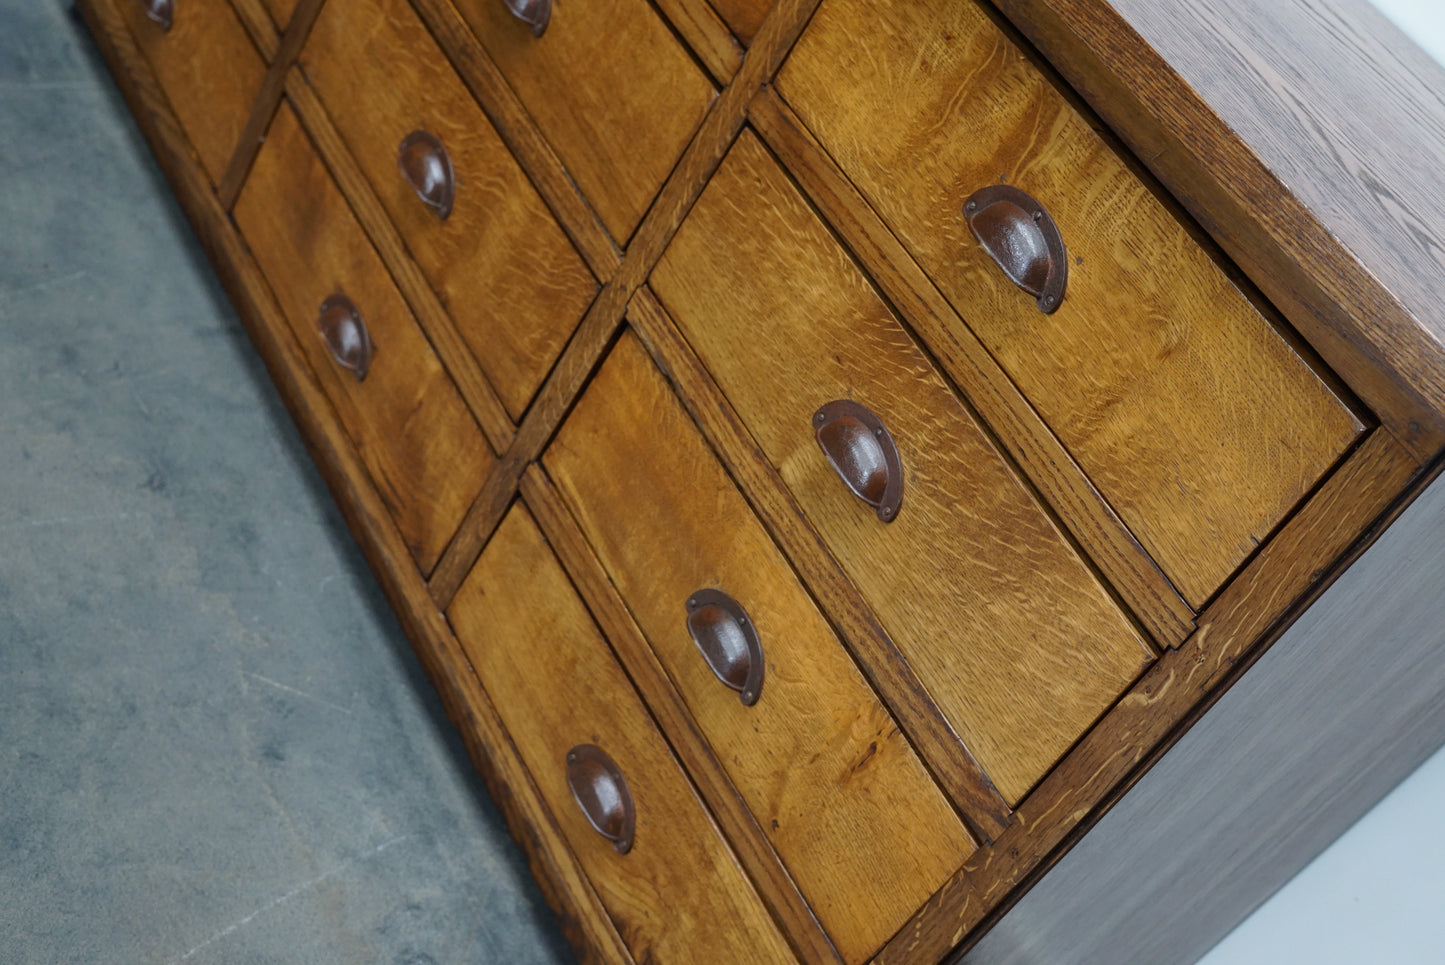 Dutch Oak Apothecary Cabinet or Bank of Drawers, Mid-20th Century